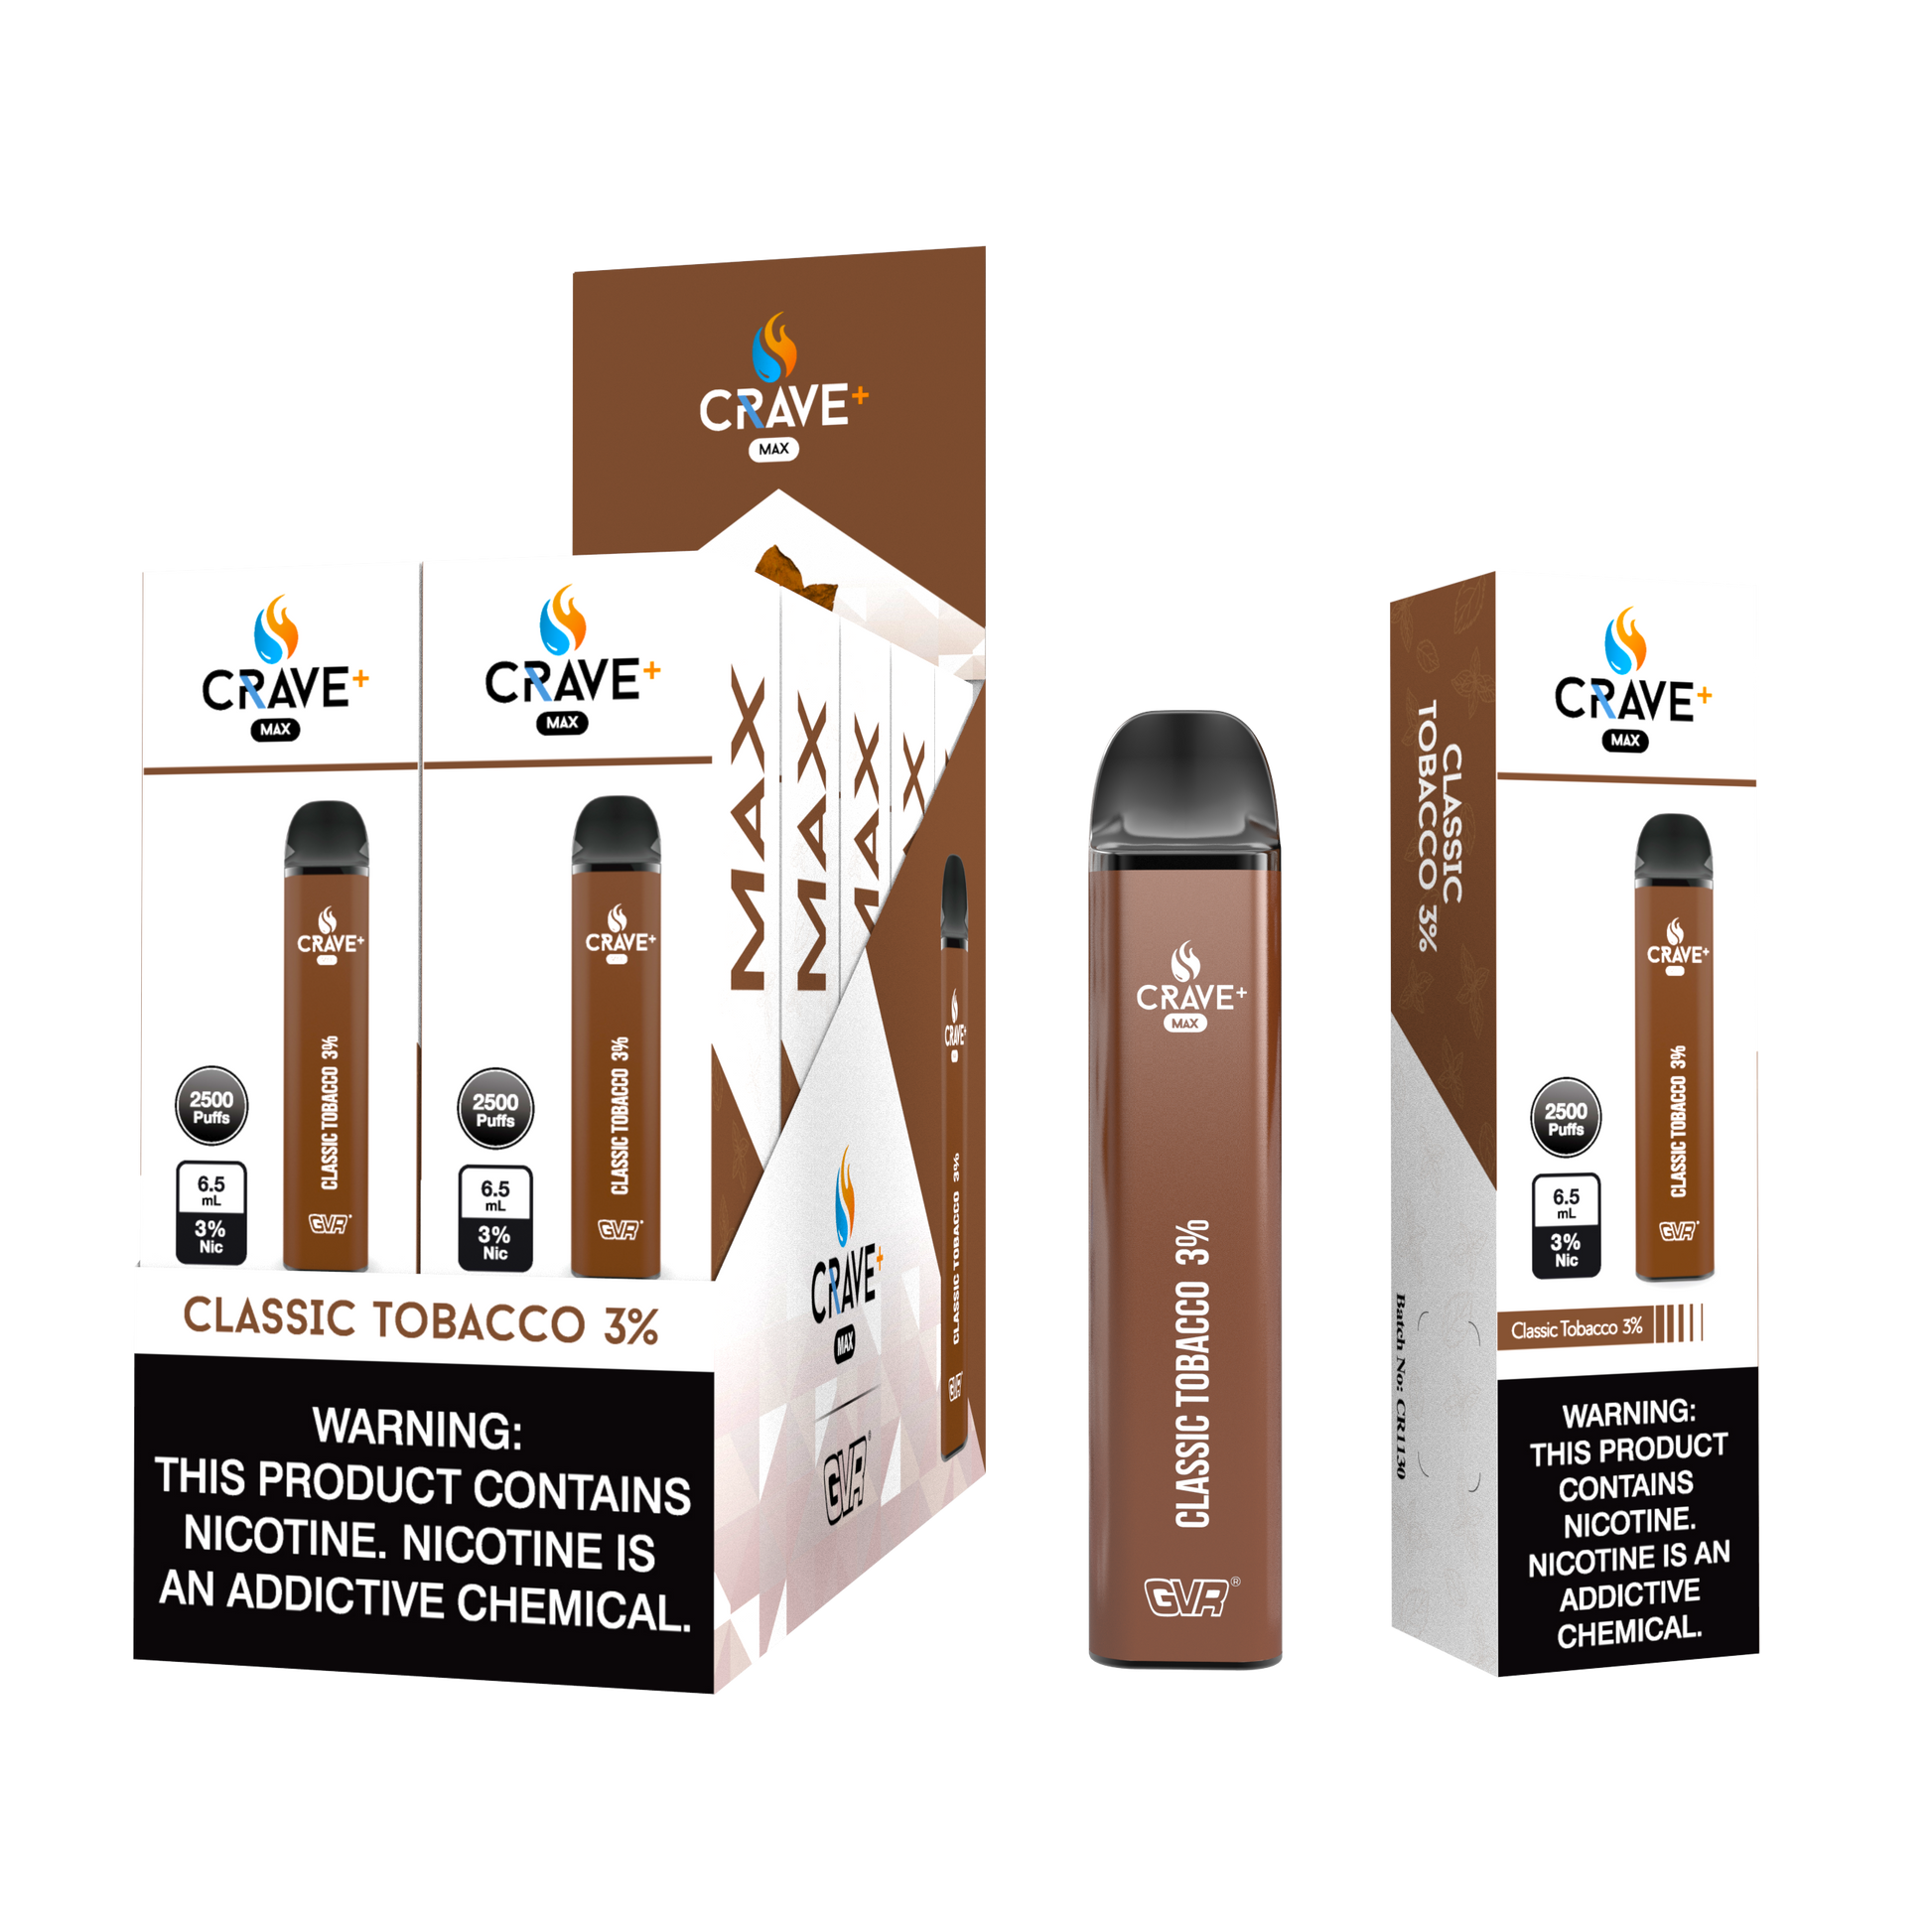 crave max, crave vape, buy crave max, crave max for sale, crave max flavors, crave flavors vape, buy crave vape online, crave max gvr, crave 2500 puffs, crave clear, crave max clear, crave clear 3%, crave clear 5%, crave max 3%, crave max 5%, crave max classic tobacco, classic tobacco crave max, tobacco crave max, classic tobacco 3% vape, classic tobacco crave max, crave max disposable